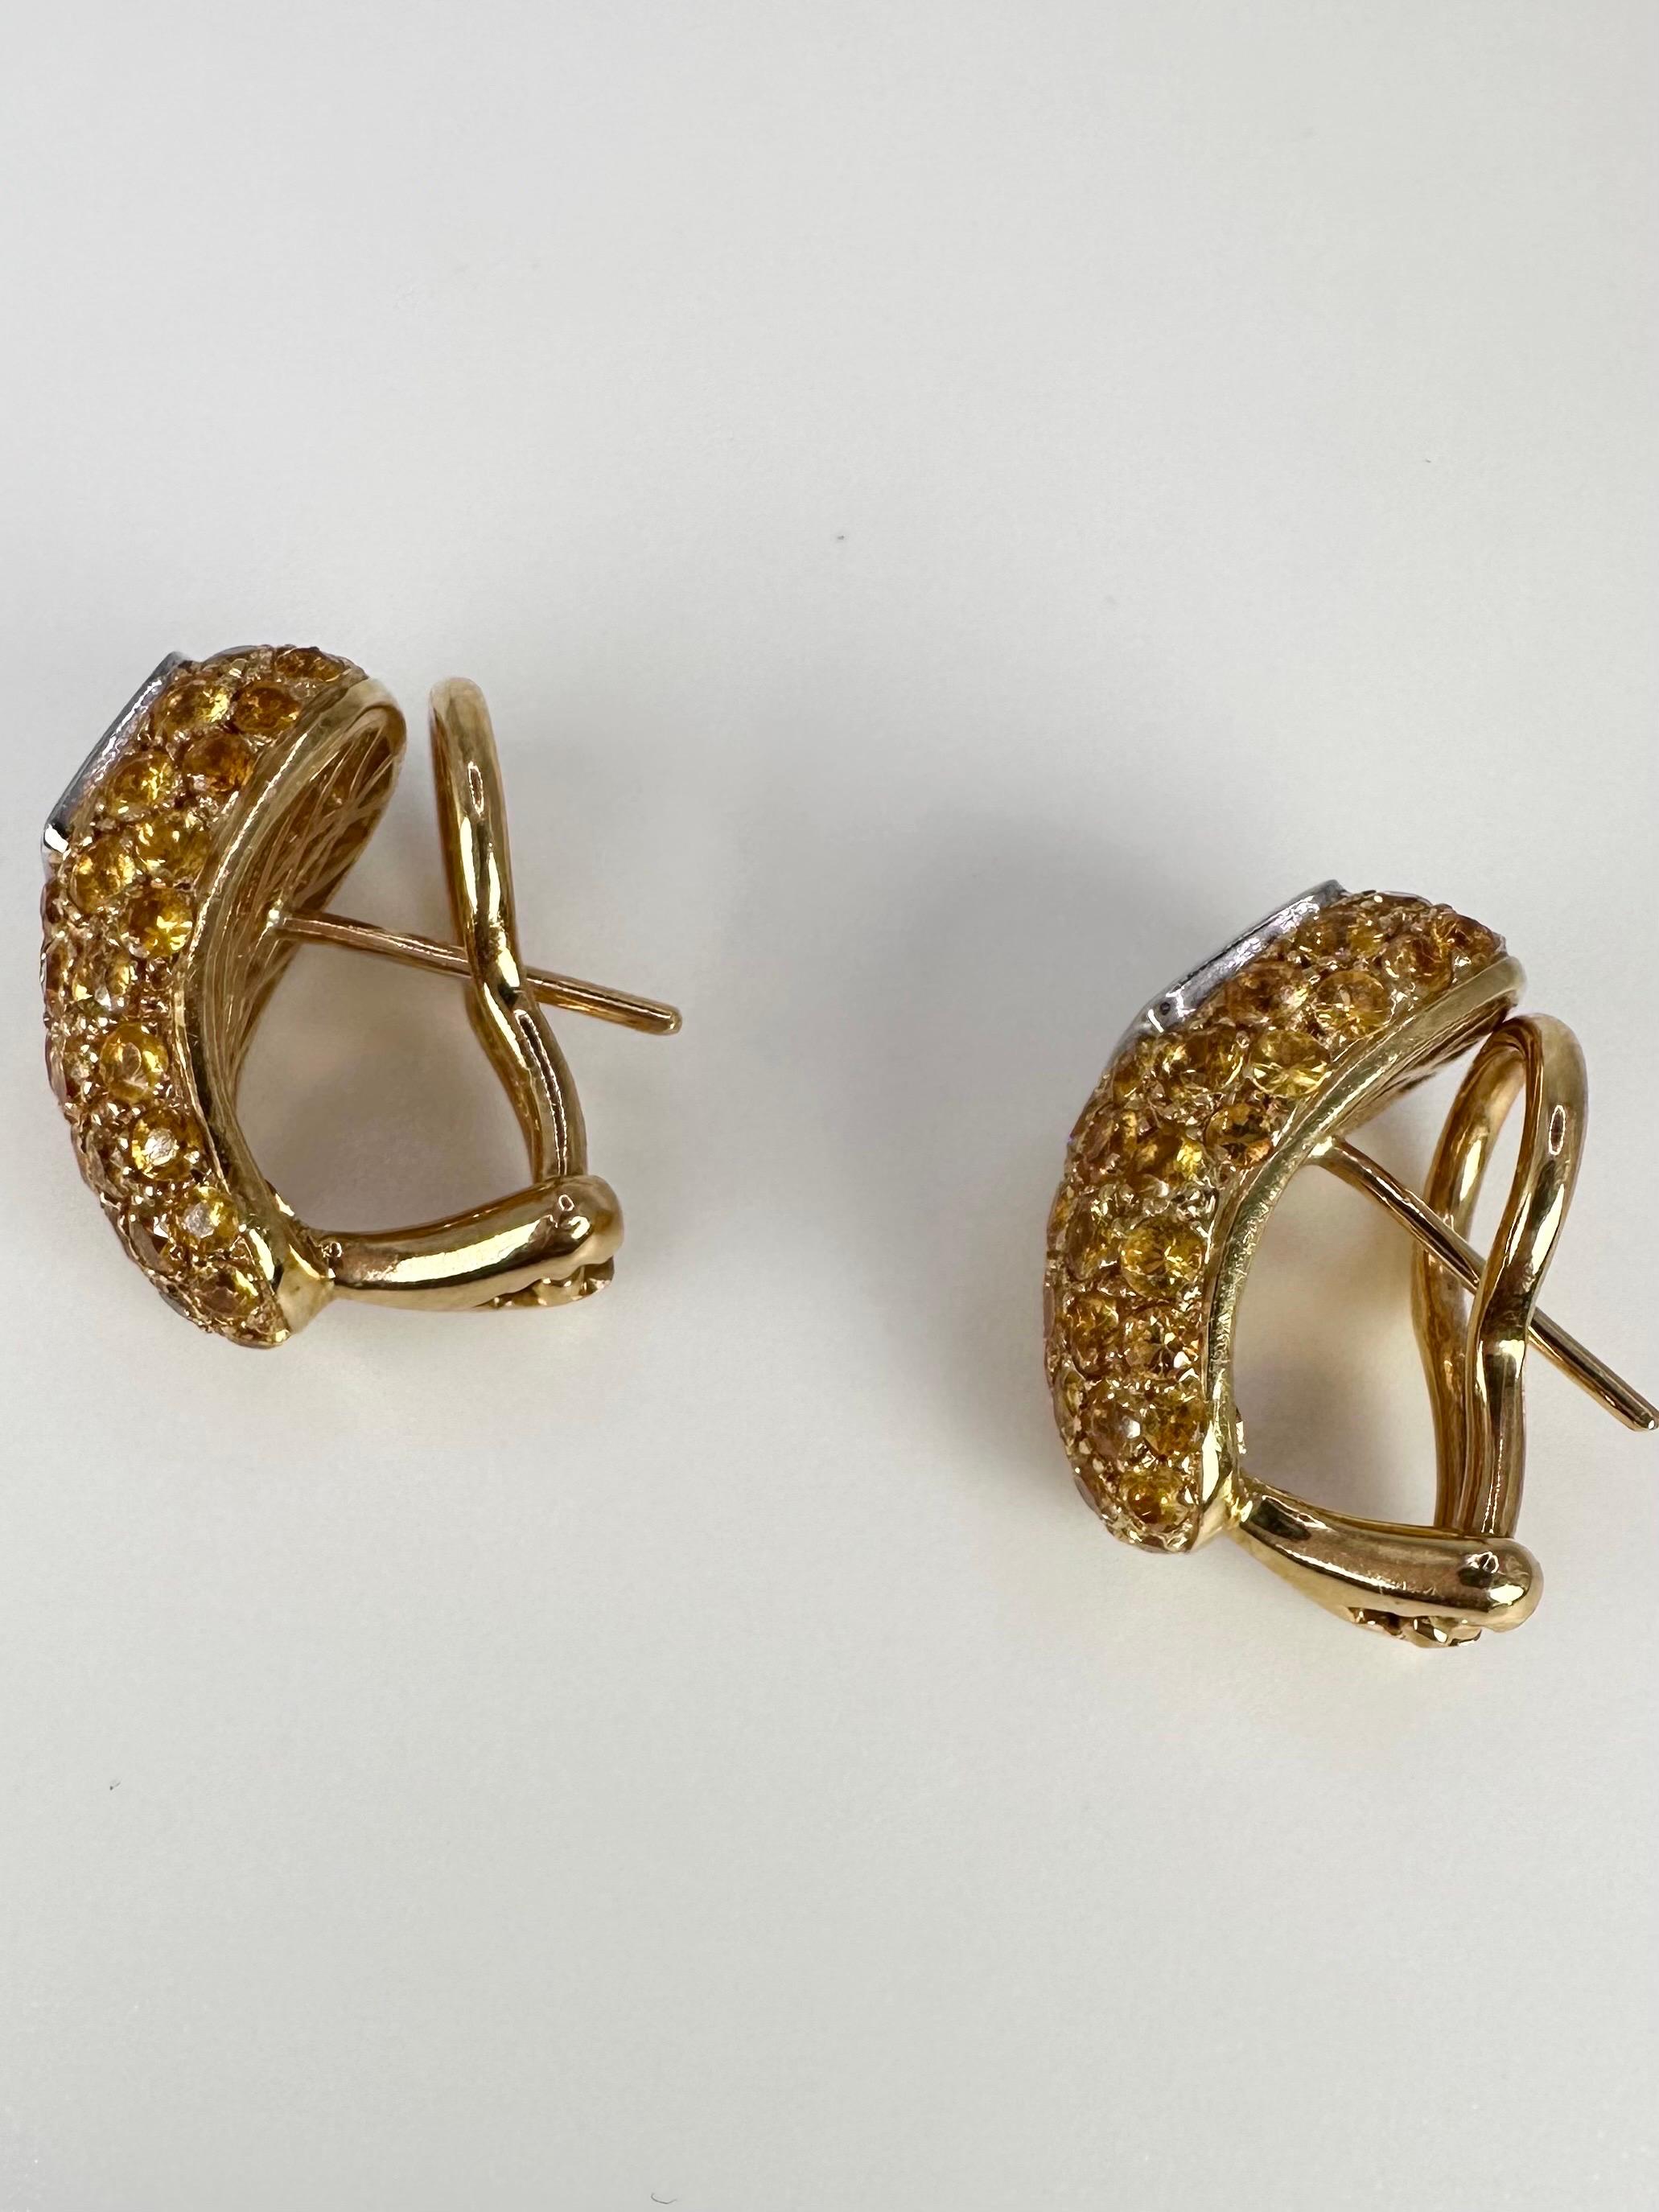 Fancy yellow diamond earrings, made with excellent craftsmanship. The pave setting makes the diamonds sparkle more than anything. The earrings are made in 18KT yellow gold with Omega backing.

GOLD: 18KT gold
NATURAL DIAMOND(S)
Clarity/Color: